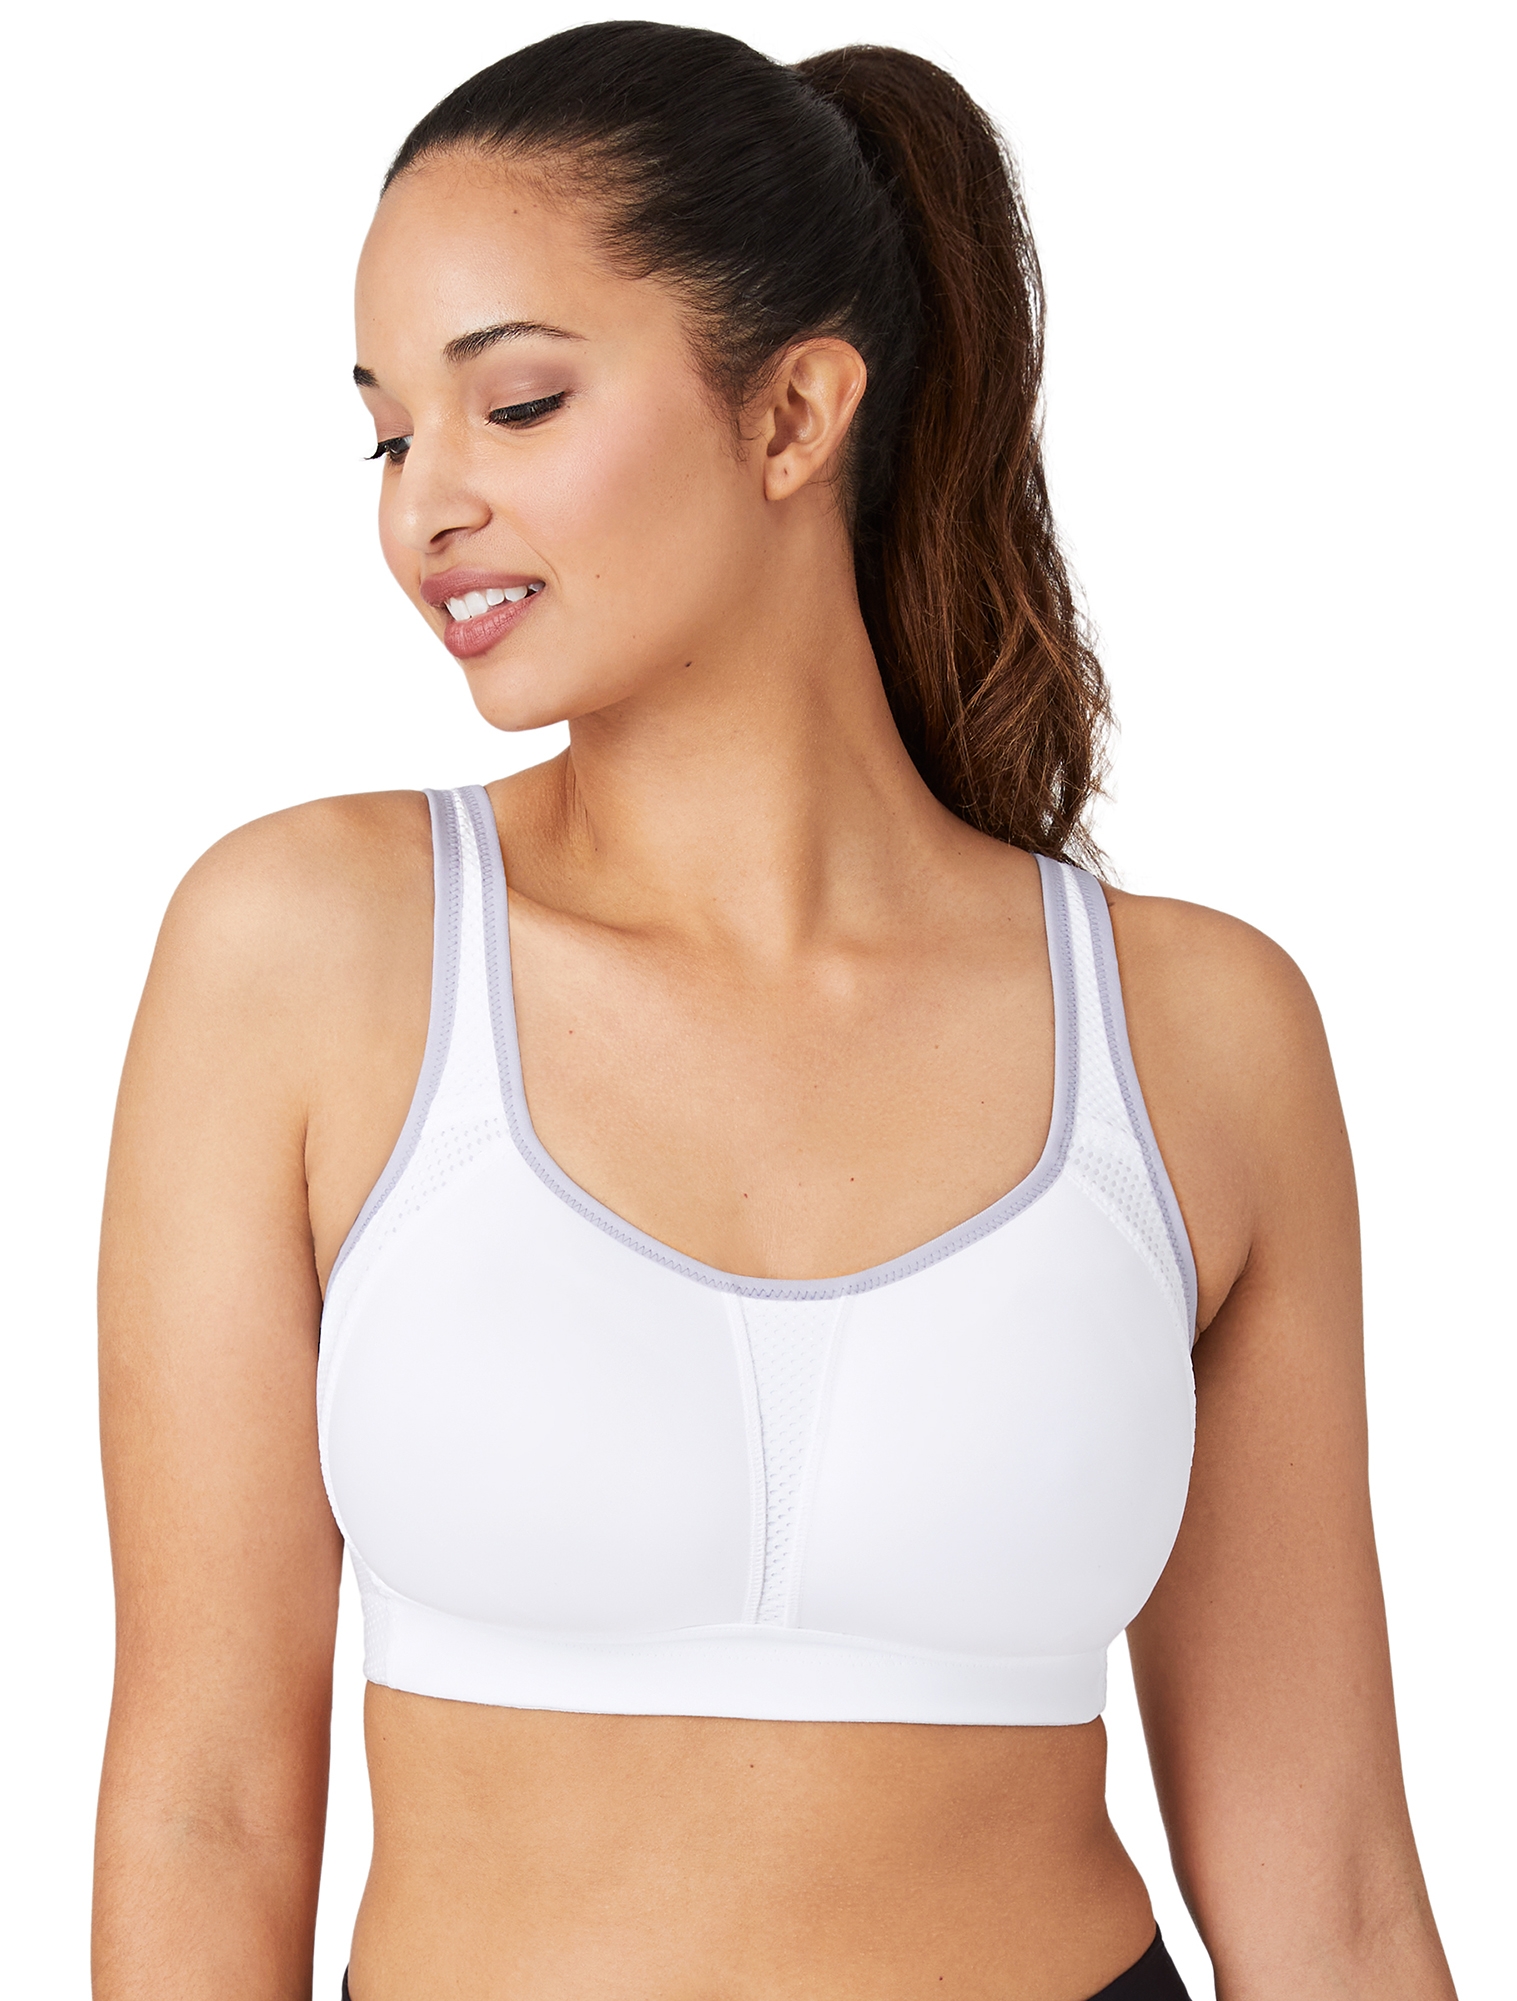 Nudist Sports Bra Longline Wirefree Padded with Medium Support For Women 